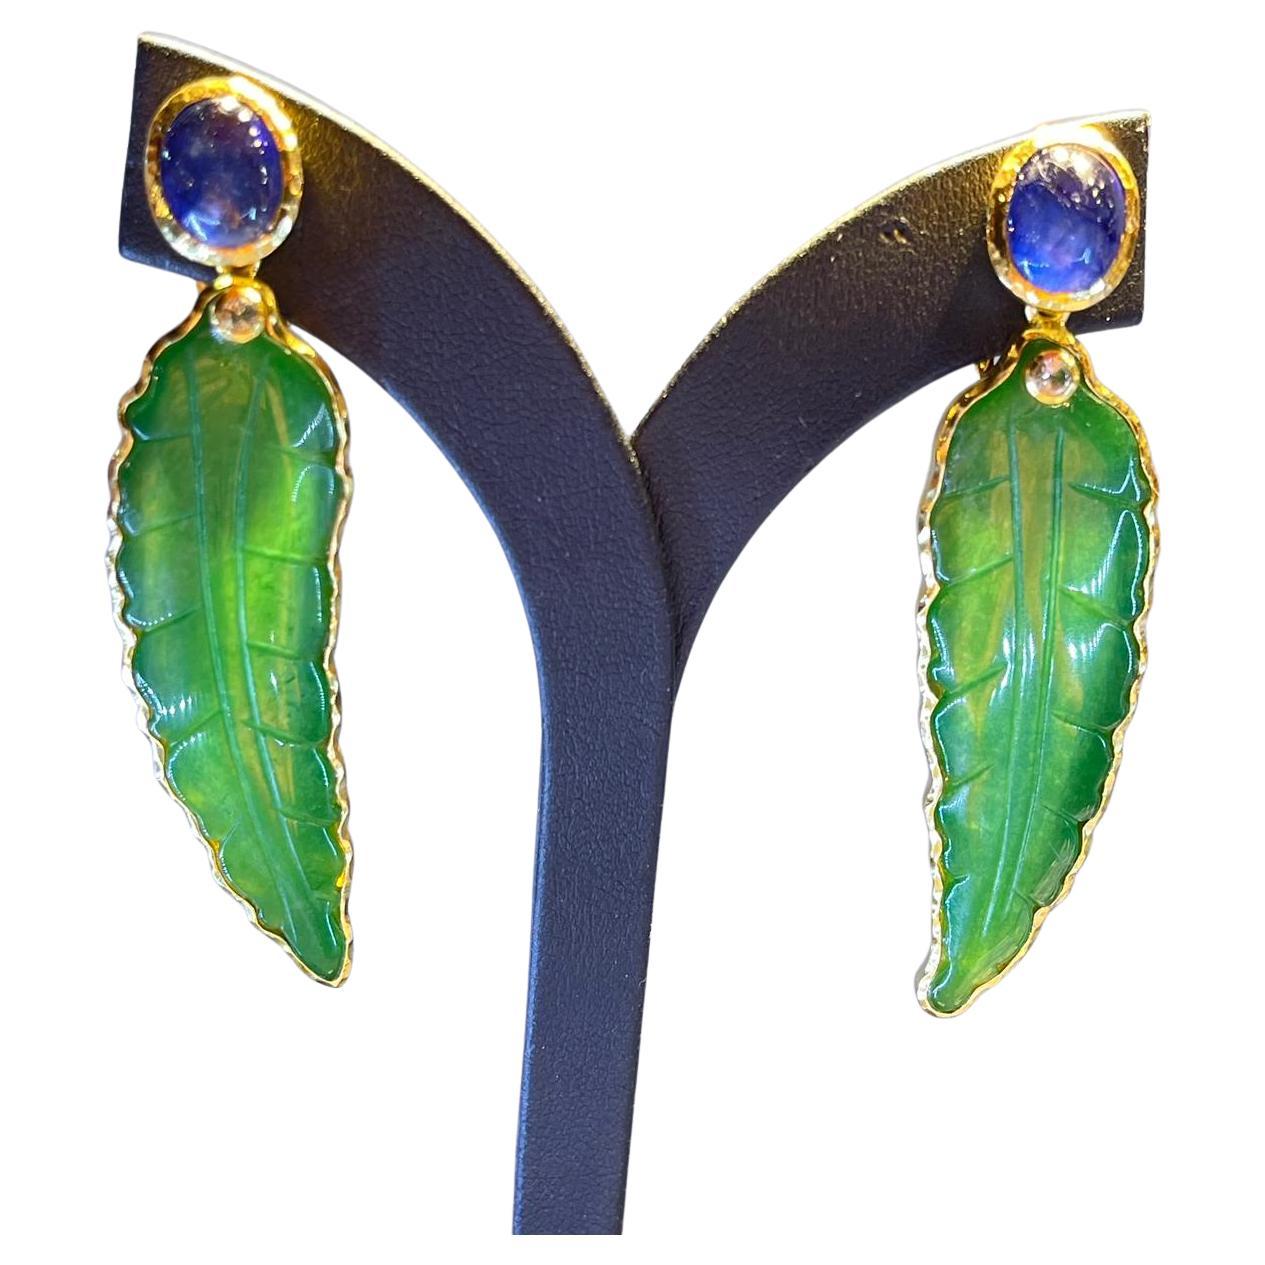 Bochic “Orient” Green Jade Earrings with Blue Sapphires Set in 22K Gold & Silver